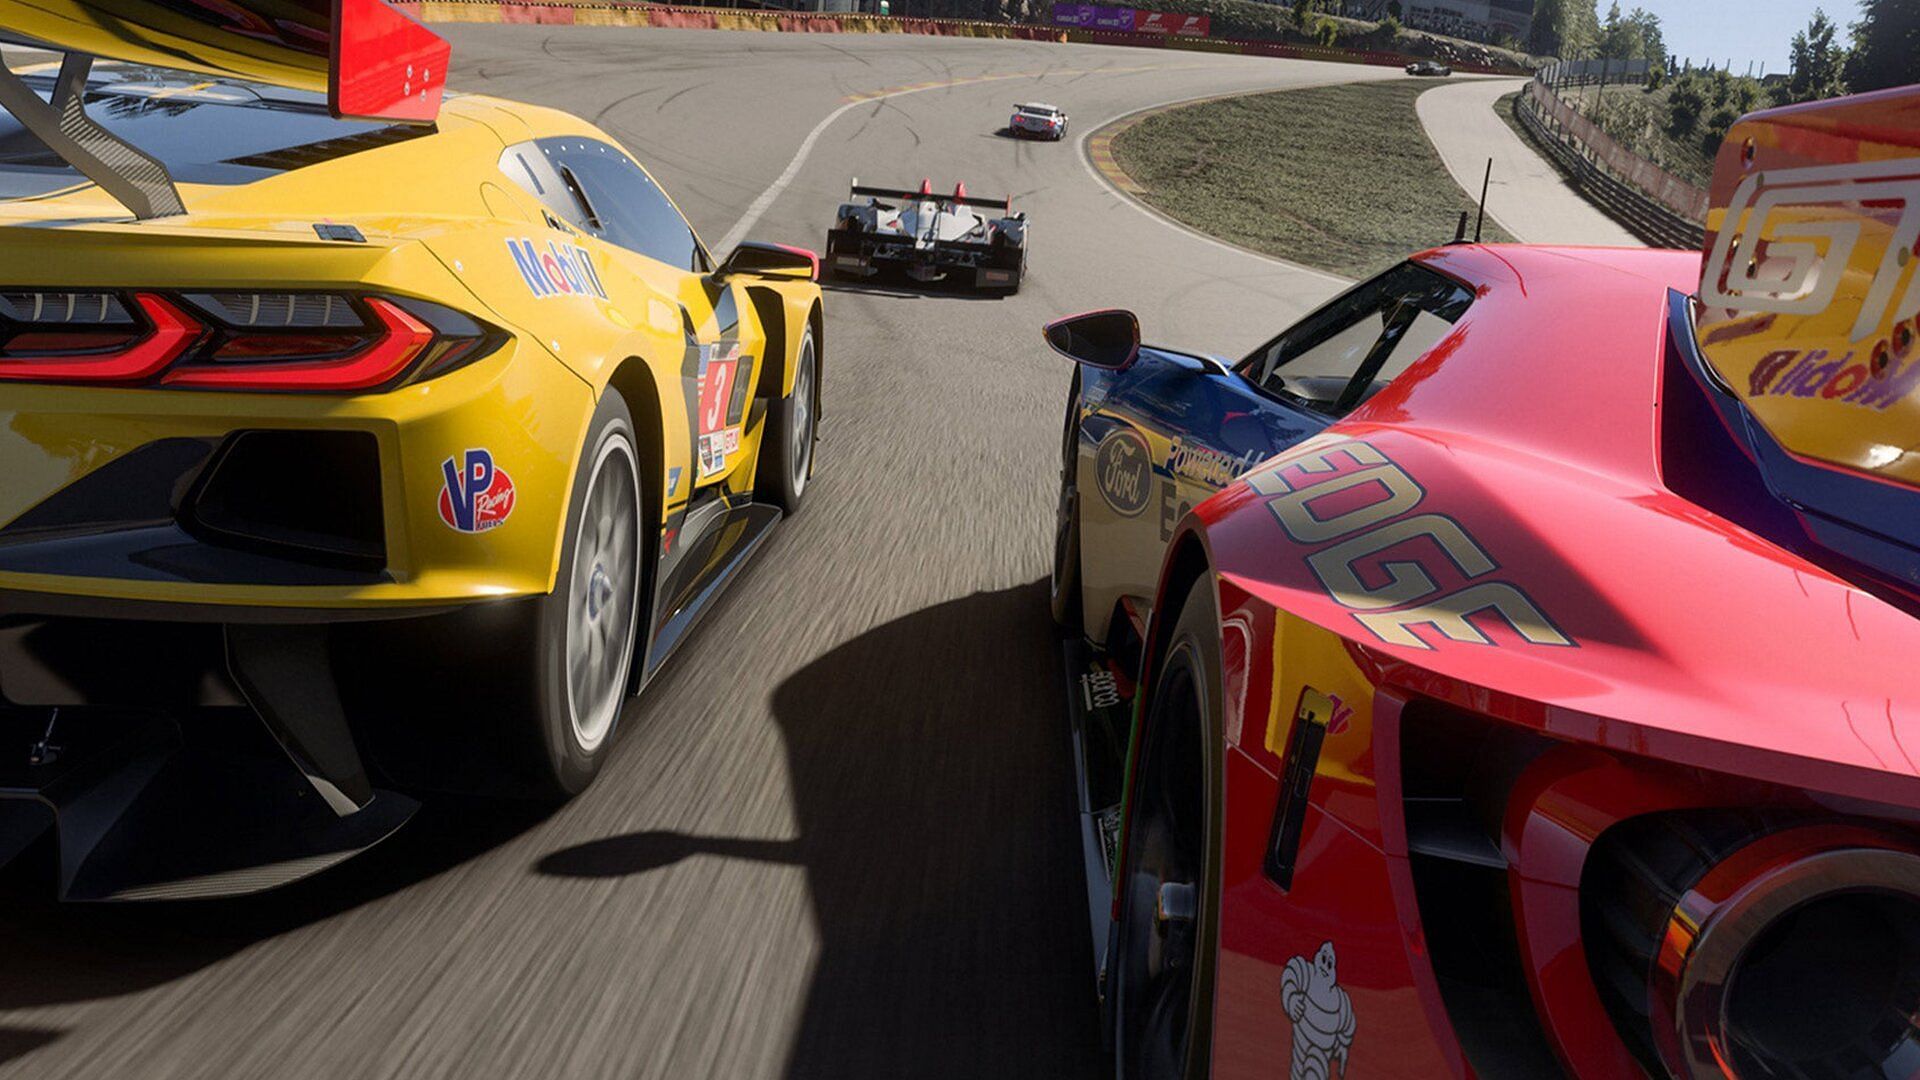 FRR, or Forza Race Regulations system, is going to undergo changes owing to its inaccuracy in regulating online races. (Image via Turn10 Studios)